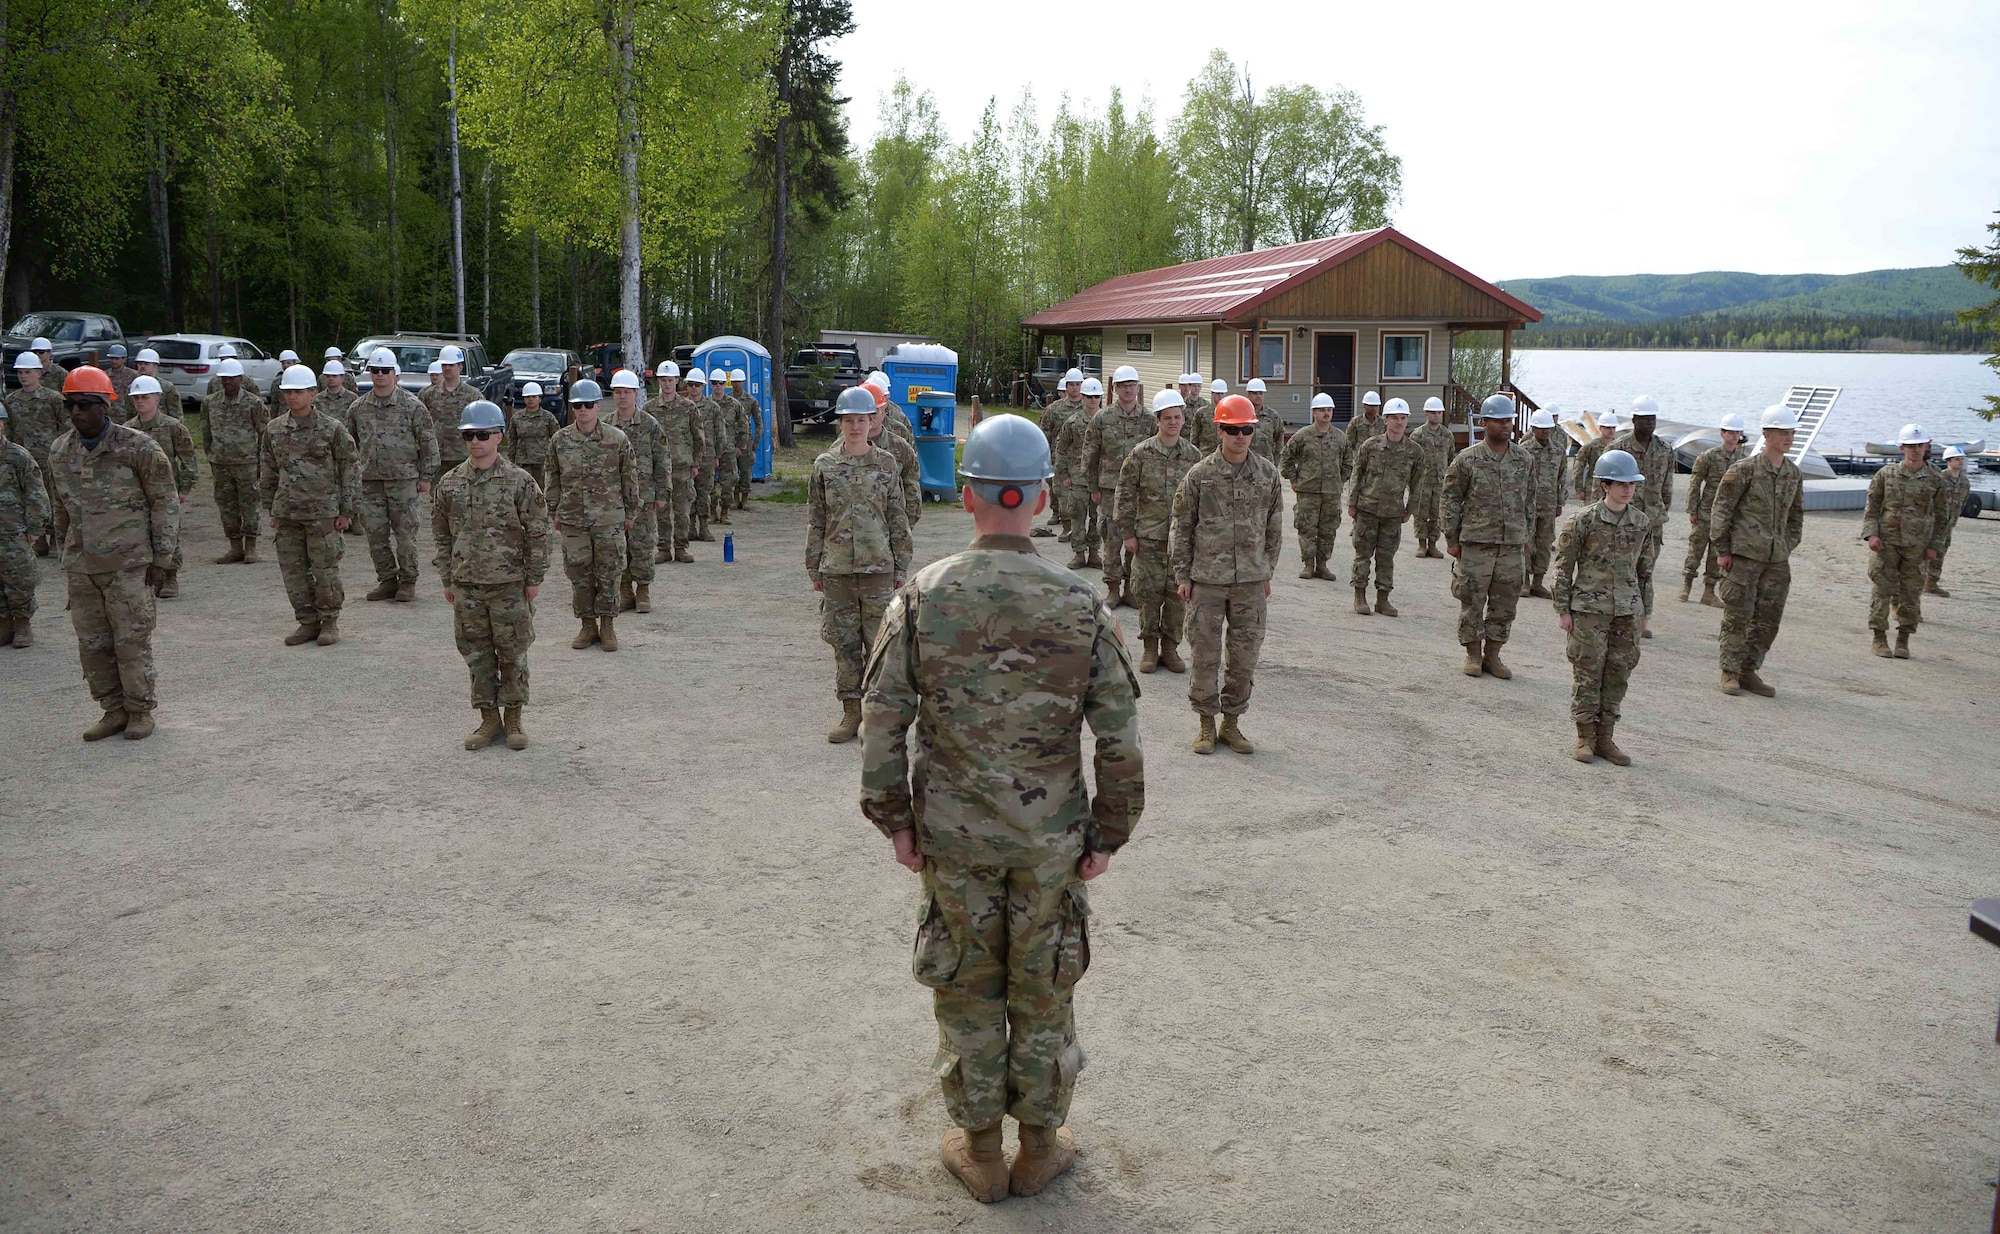 U.S. Air Force Lt. Col. Nicholas Van Elsacker, the 354th CES commander, takes charge of approximately 135 Airmen during a troop training project May 26, 2021, at the Birch Lake Military Recreation Area, Alaska. With such a successful turnout and results, the leaders of the 354th CES are looking at continuing to upgrade the recreation area little by little each year. (U.S. Air Force photo by Senior Airman Beaux Hebert)